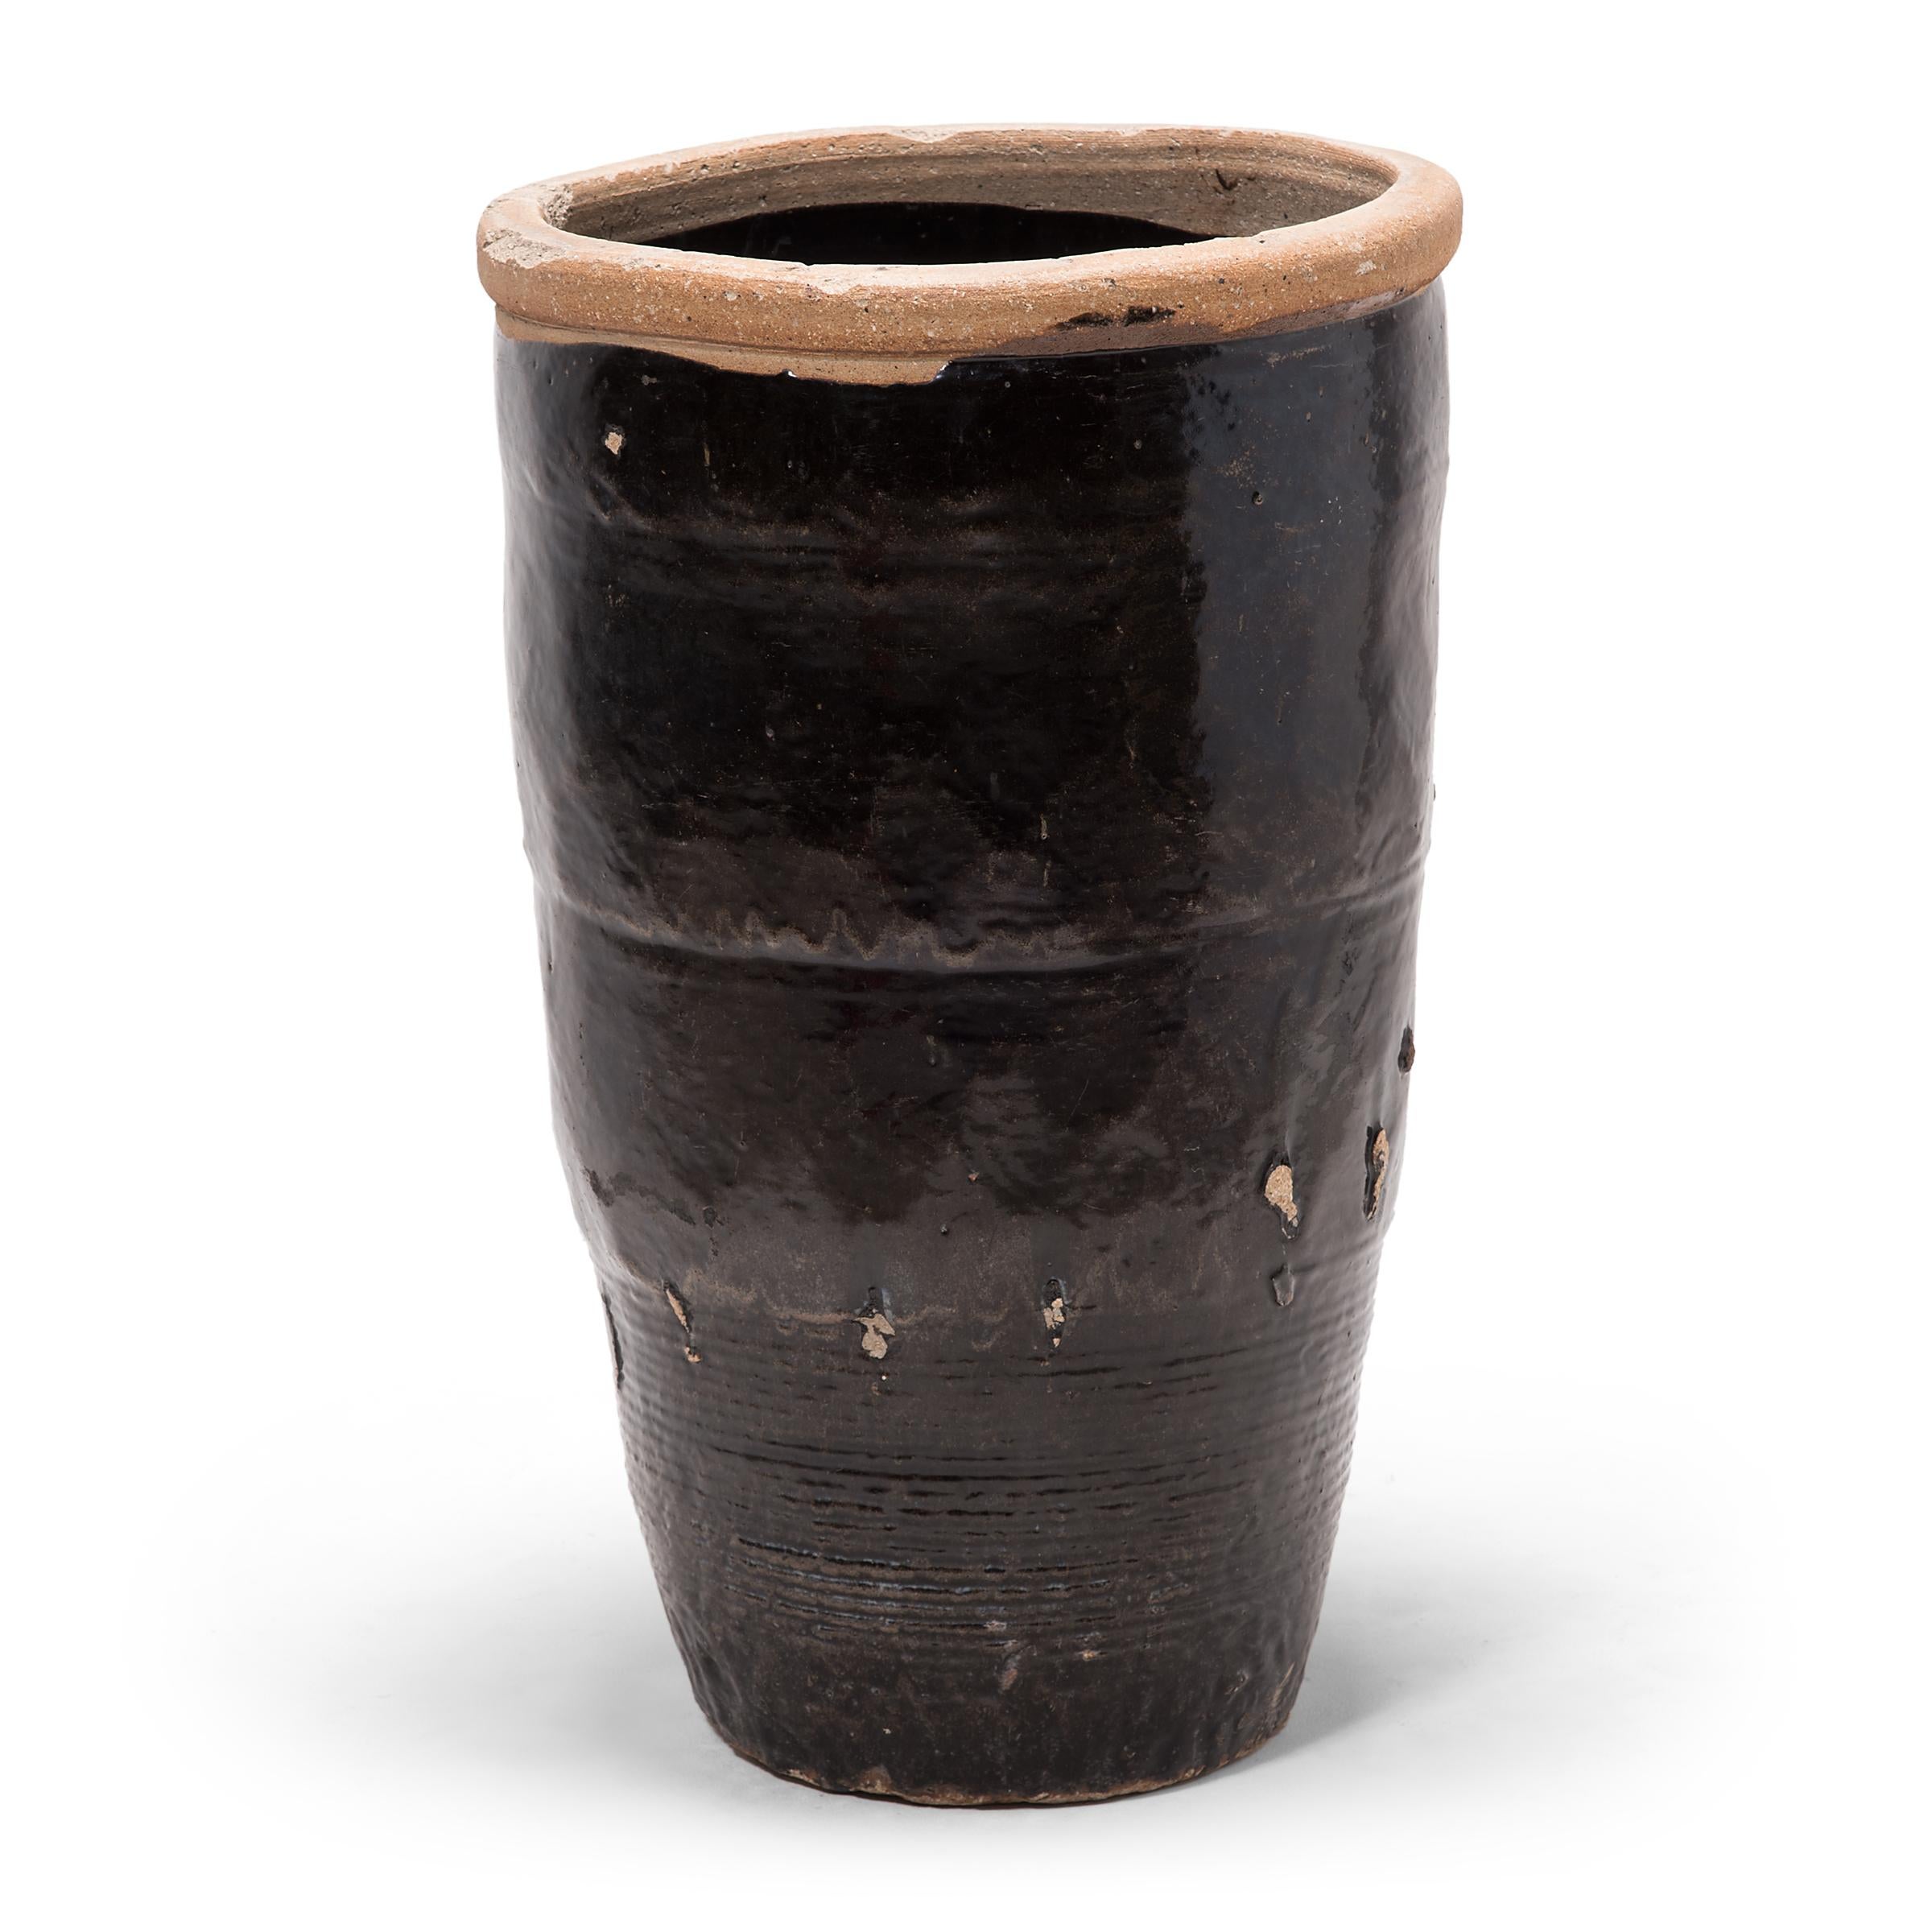 Originally used for pickling foods, this monumental early 20th century vessel from China's Shanxi province is coated inside and out with a dark glaze. Subtle ridges at the base suggest that the jar was fashioned by coiling flattened ropes of clay